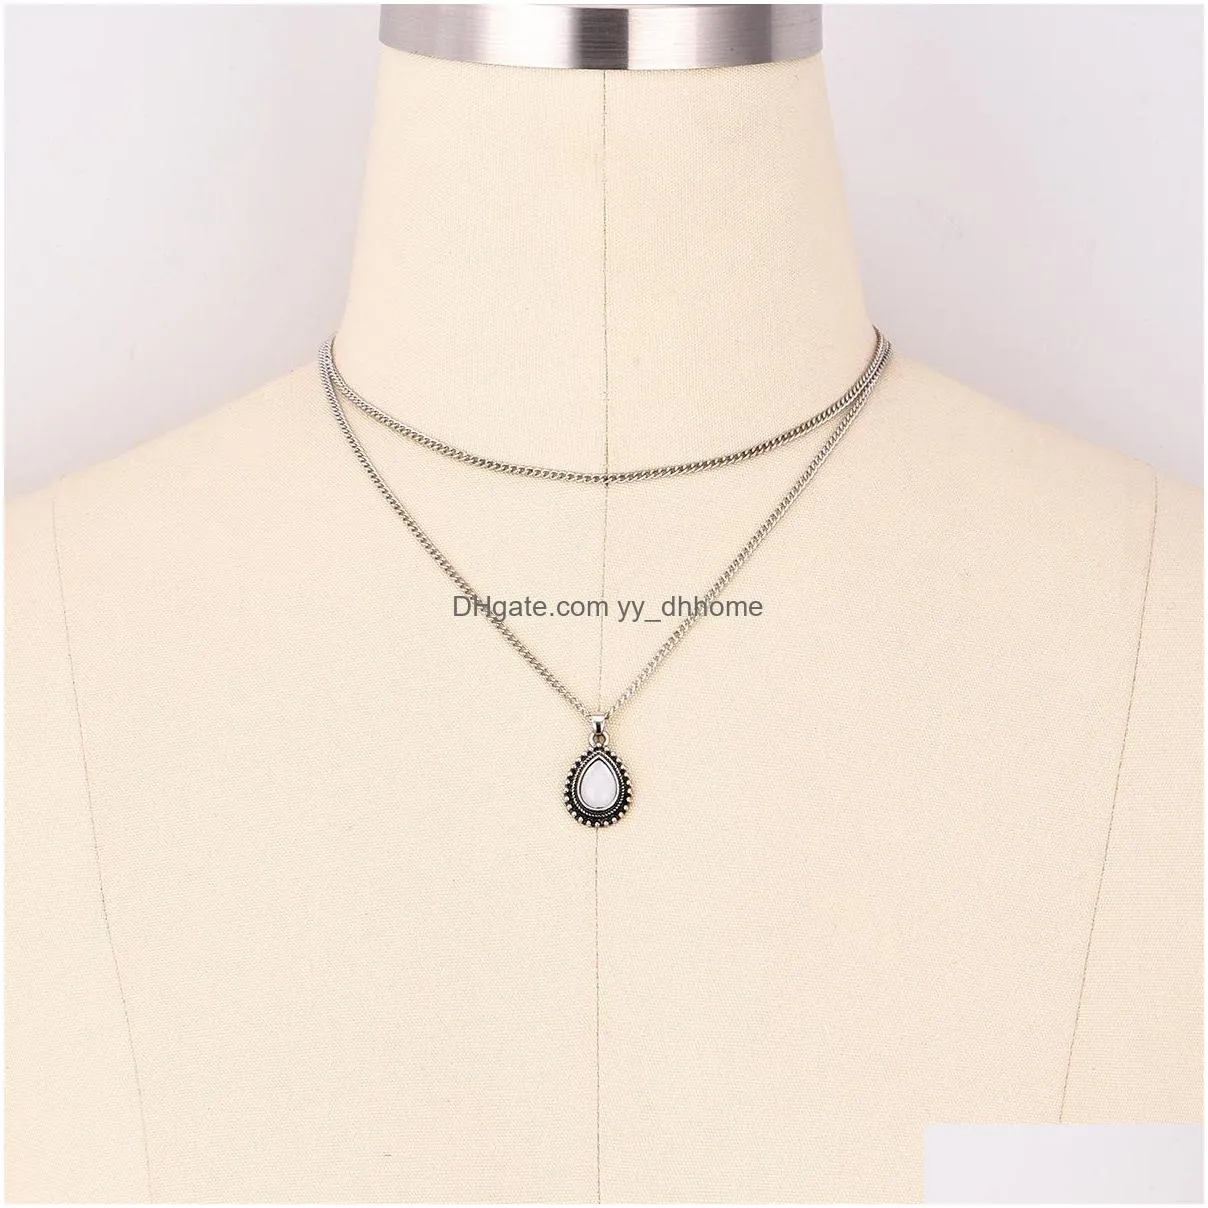  fashion double horn necklace crescent water drop necklace boho jewelry minimal girlfriend gift